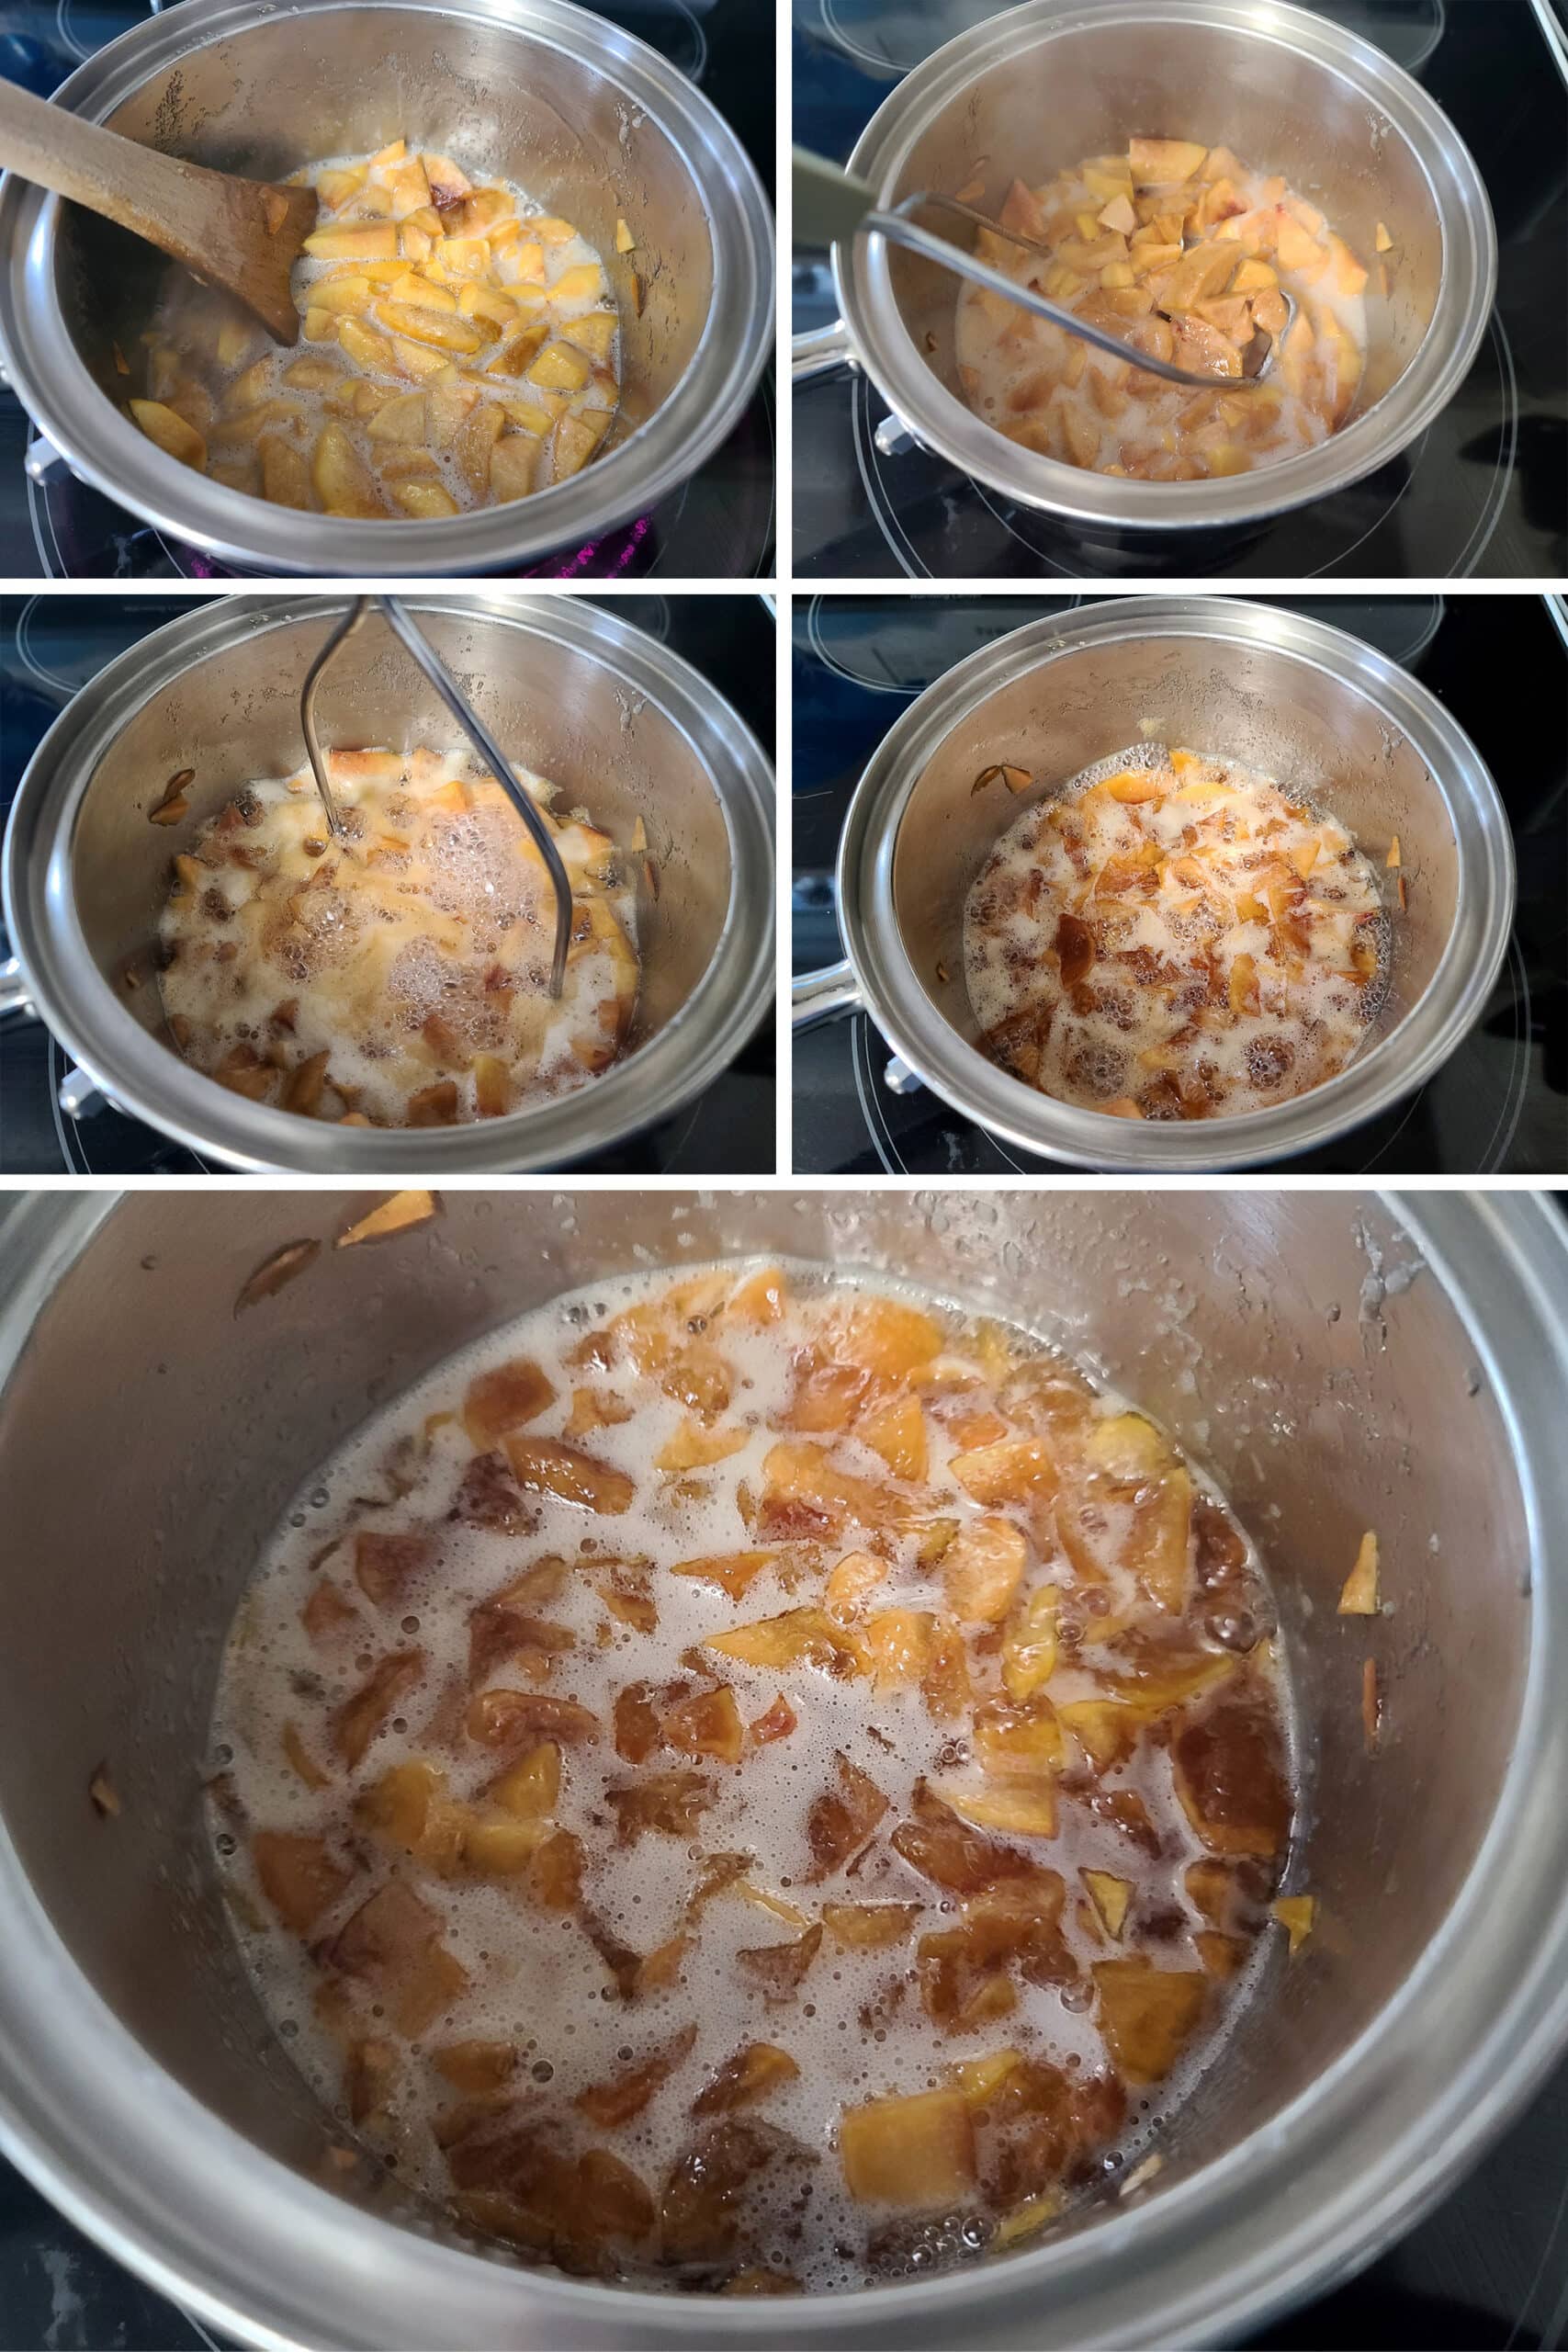 A 5 part image showing various stages of the peach jam cooking, the fruit breaking down and the mixture thickening.